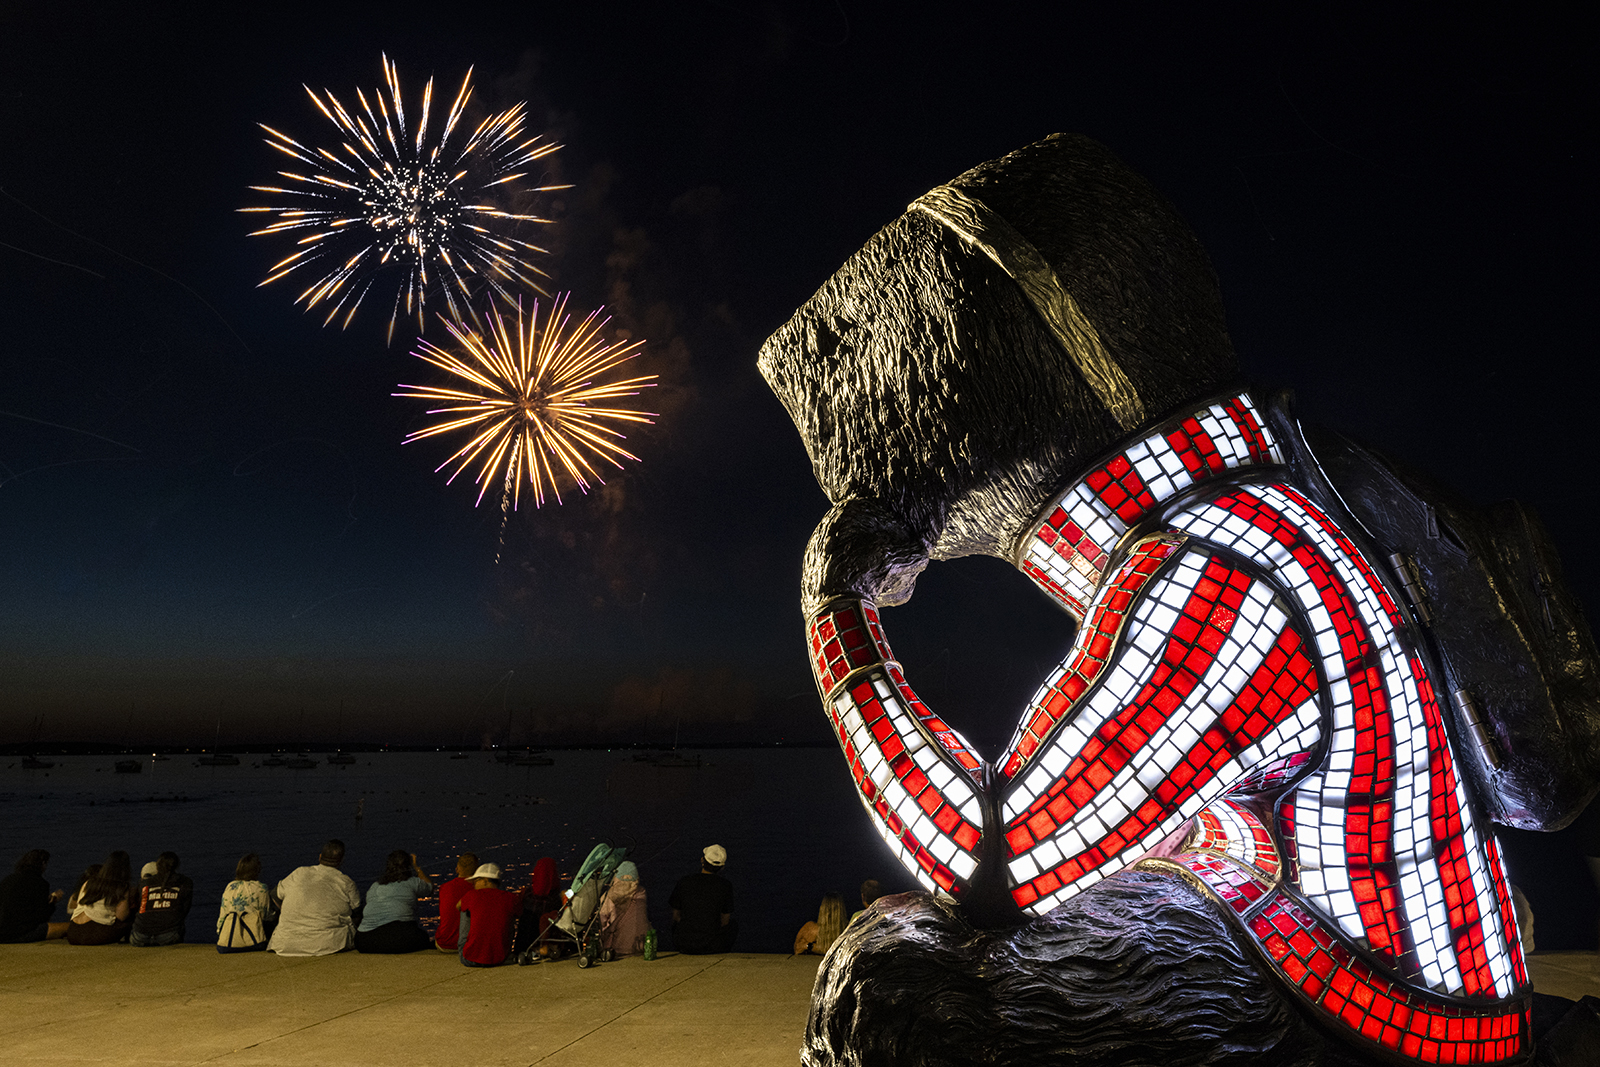 Statue of Bucky Badger against dark sky filled with fireworks